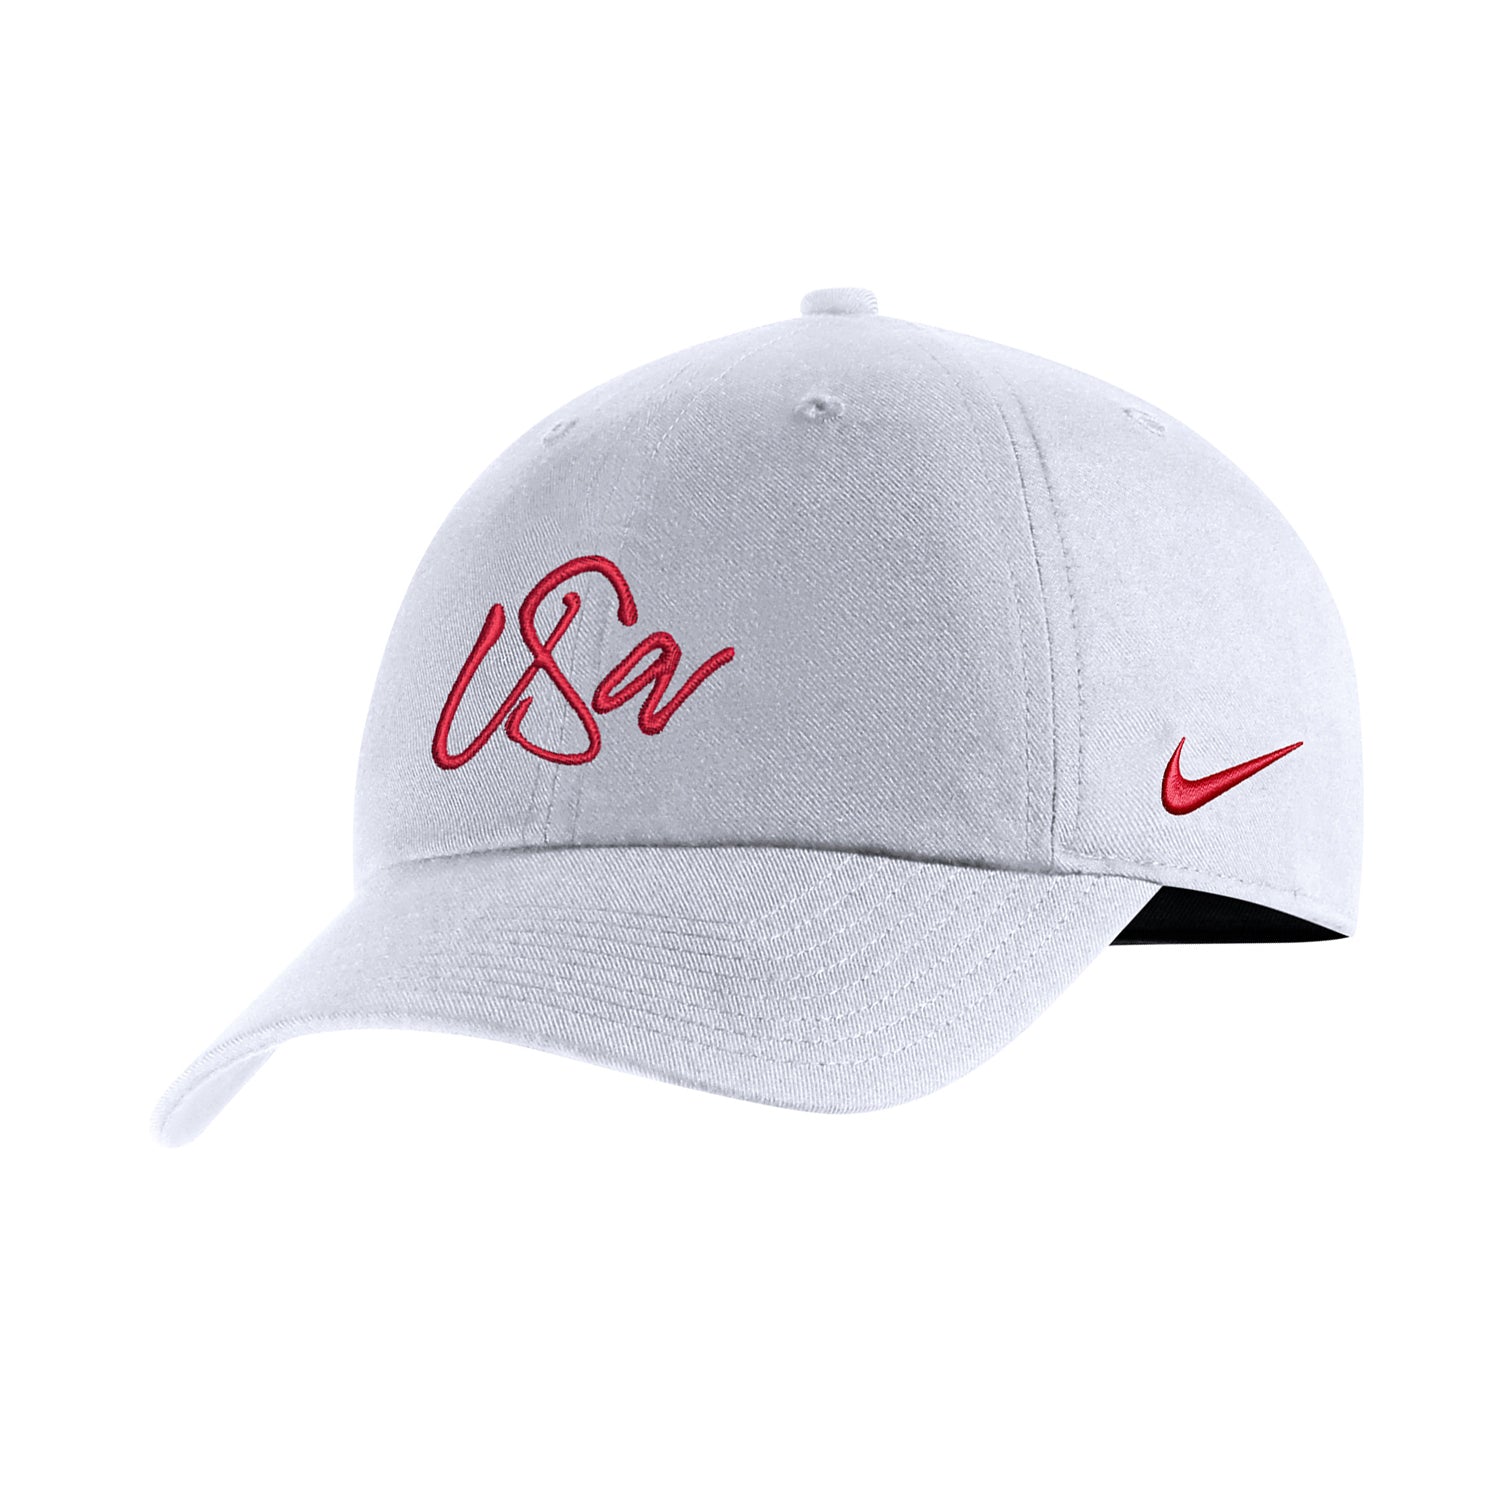 Women\'s Nike USWNT Official Soccer - U.S. Script Store Hat Campus